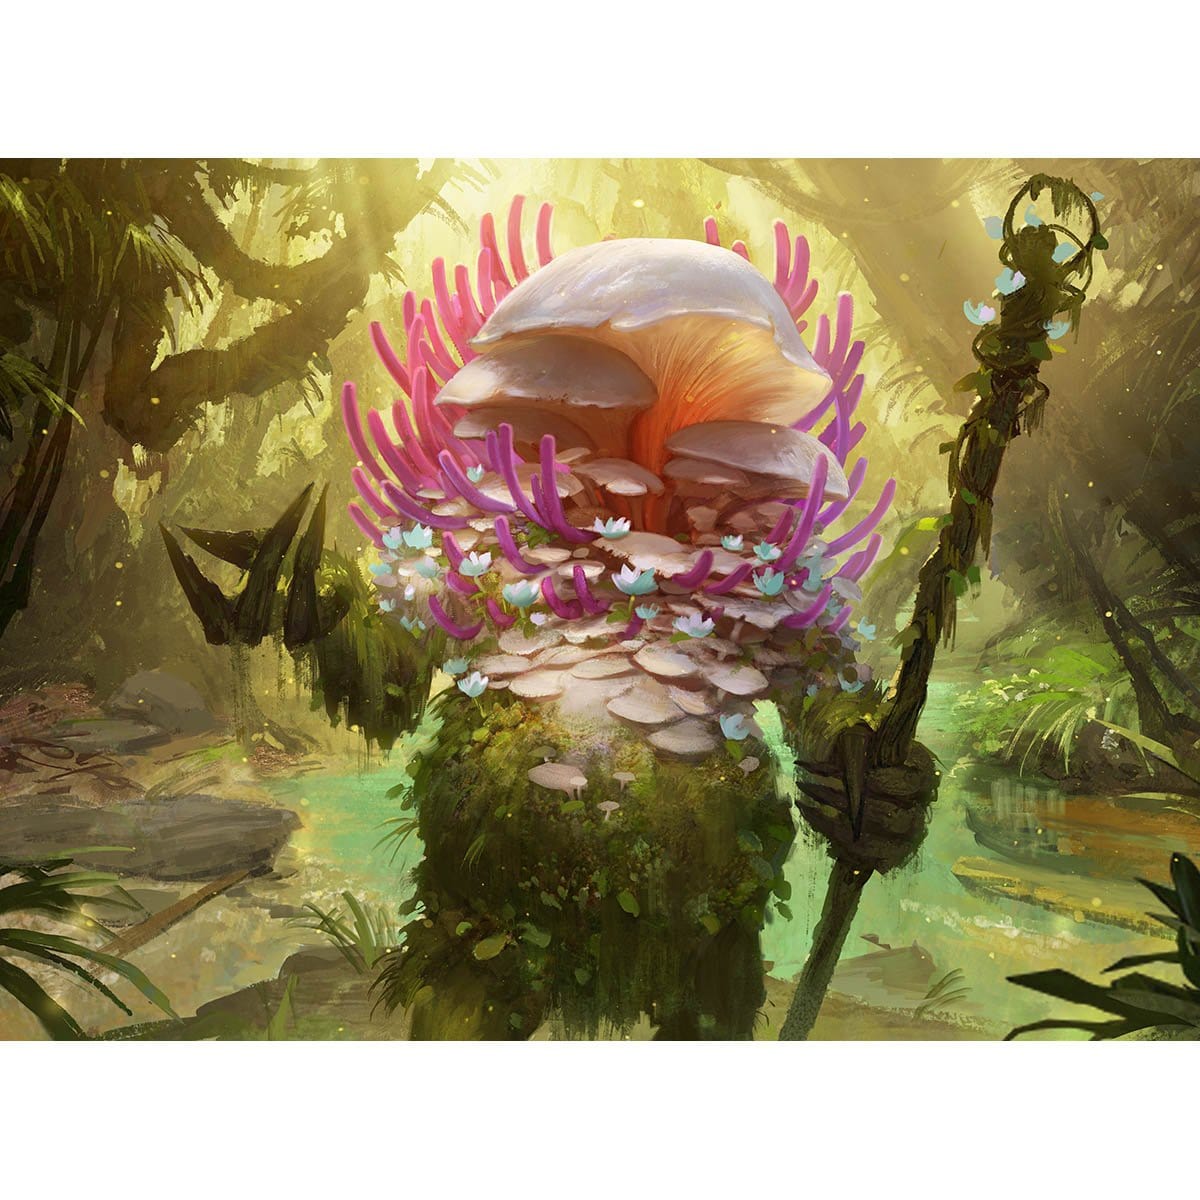 Sporecrown Thallid Print - Print - Original Magic Art - Accessories for Magic the Gathering and other card games